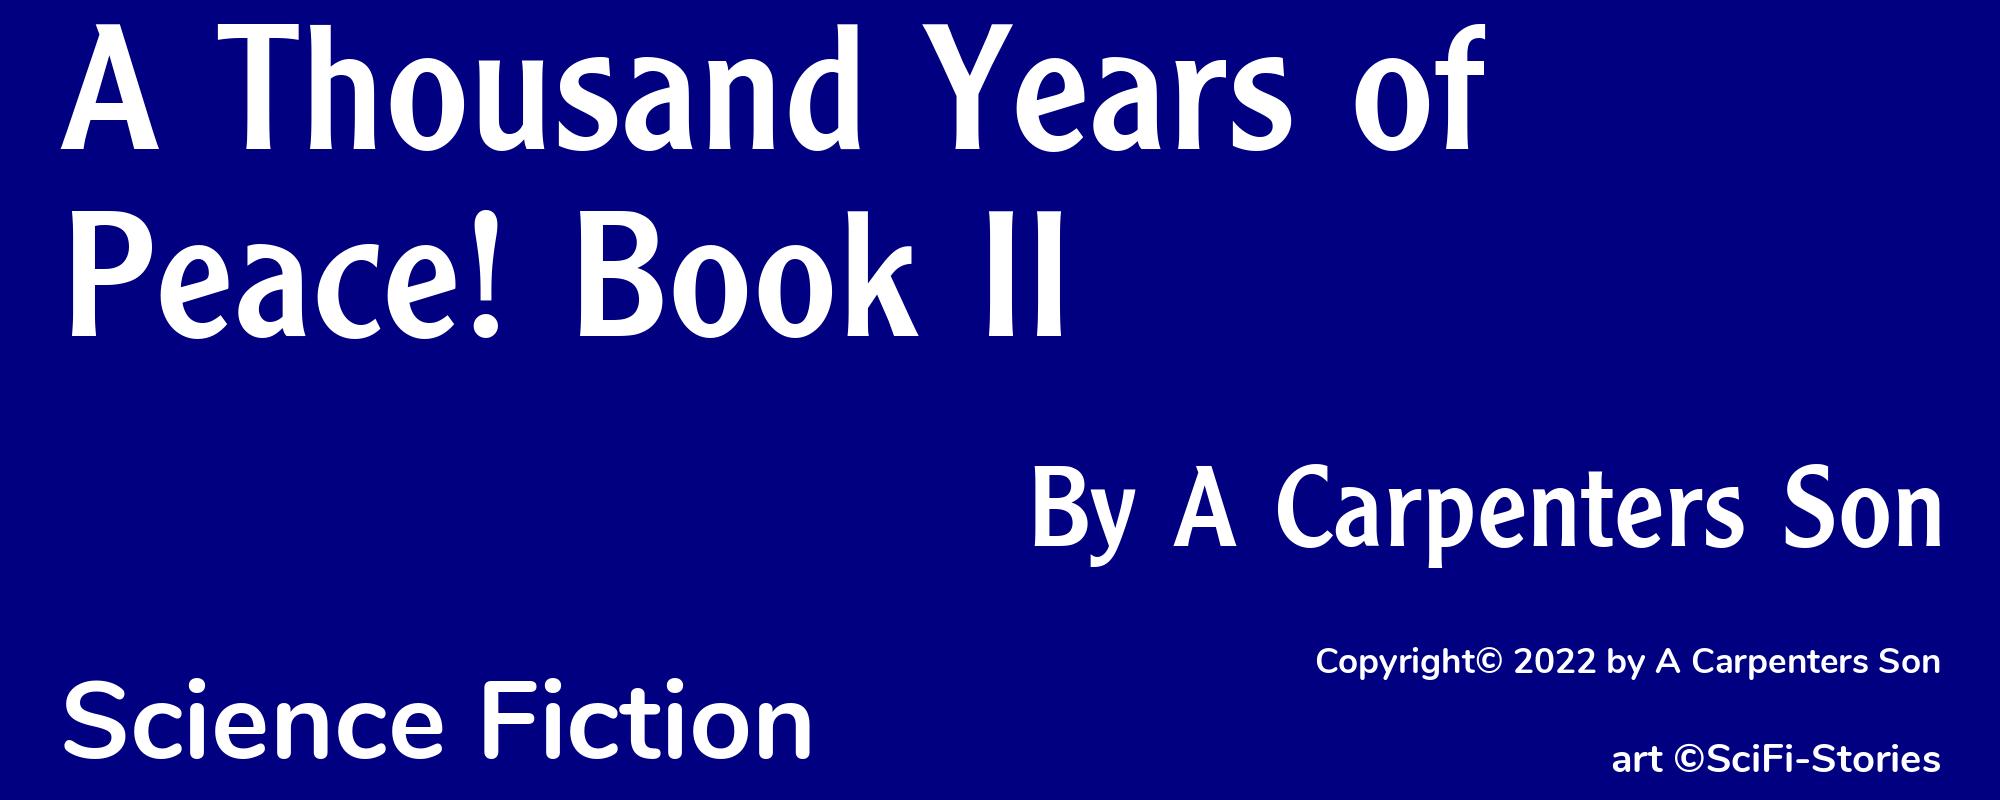 A Thousand Years of Peace! Book II - Cover